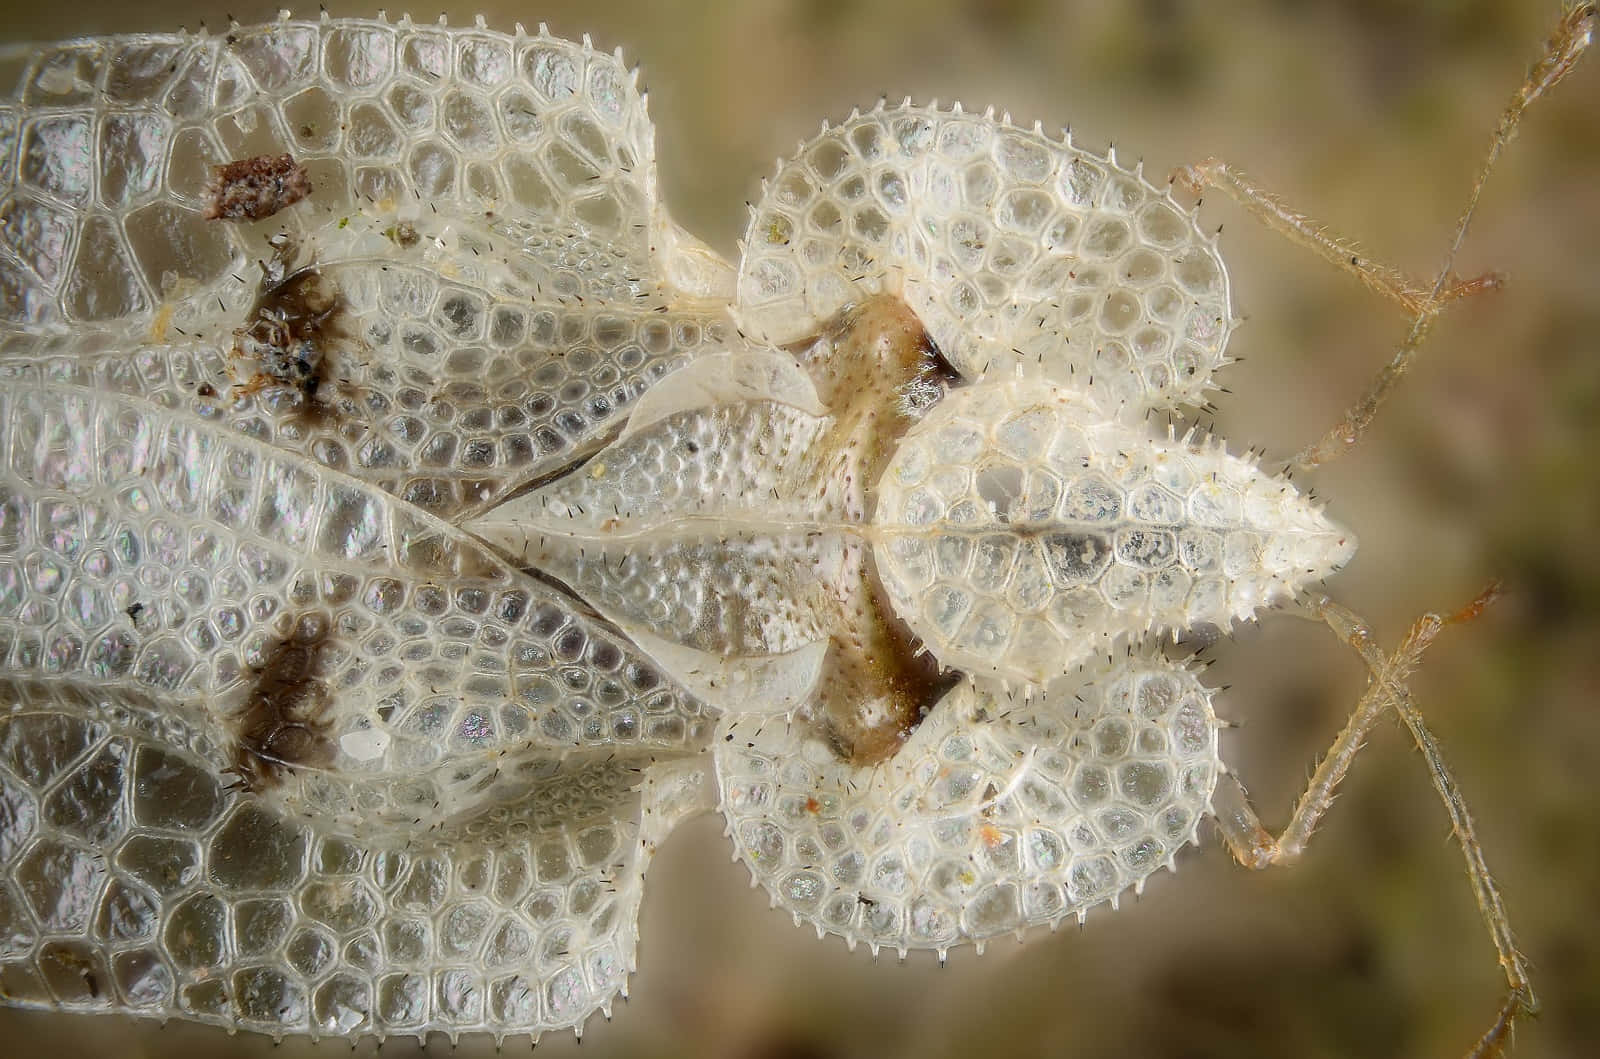 Lace Bug Detailed Macro Photography Wallpaper